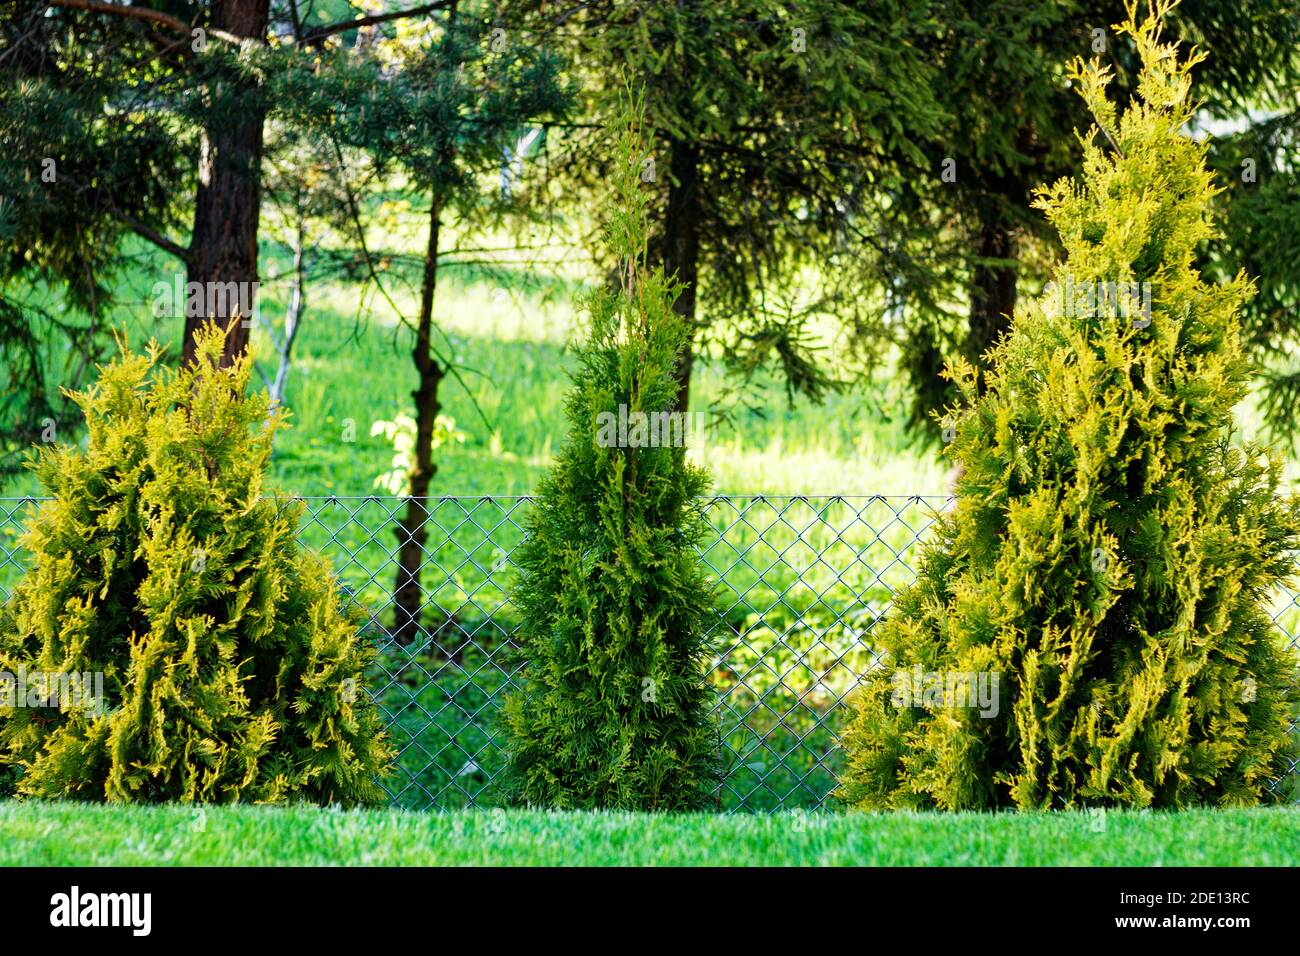 View of three green and fresh thuja trees in a row in the garden Stock Photo